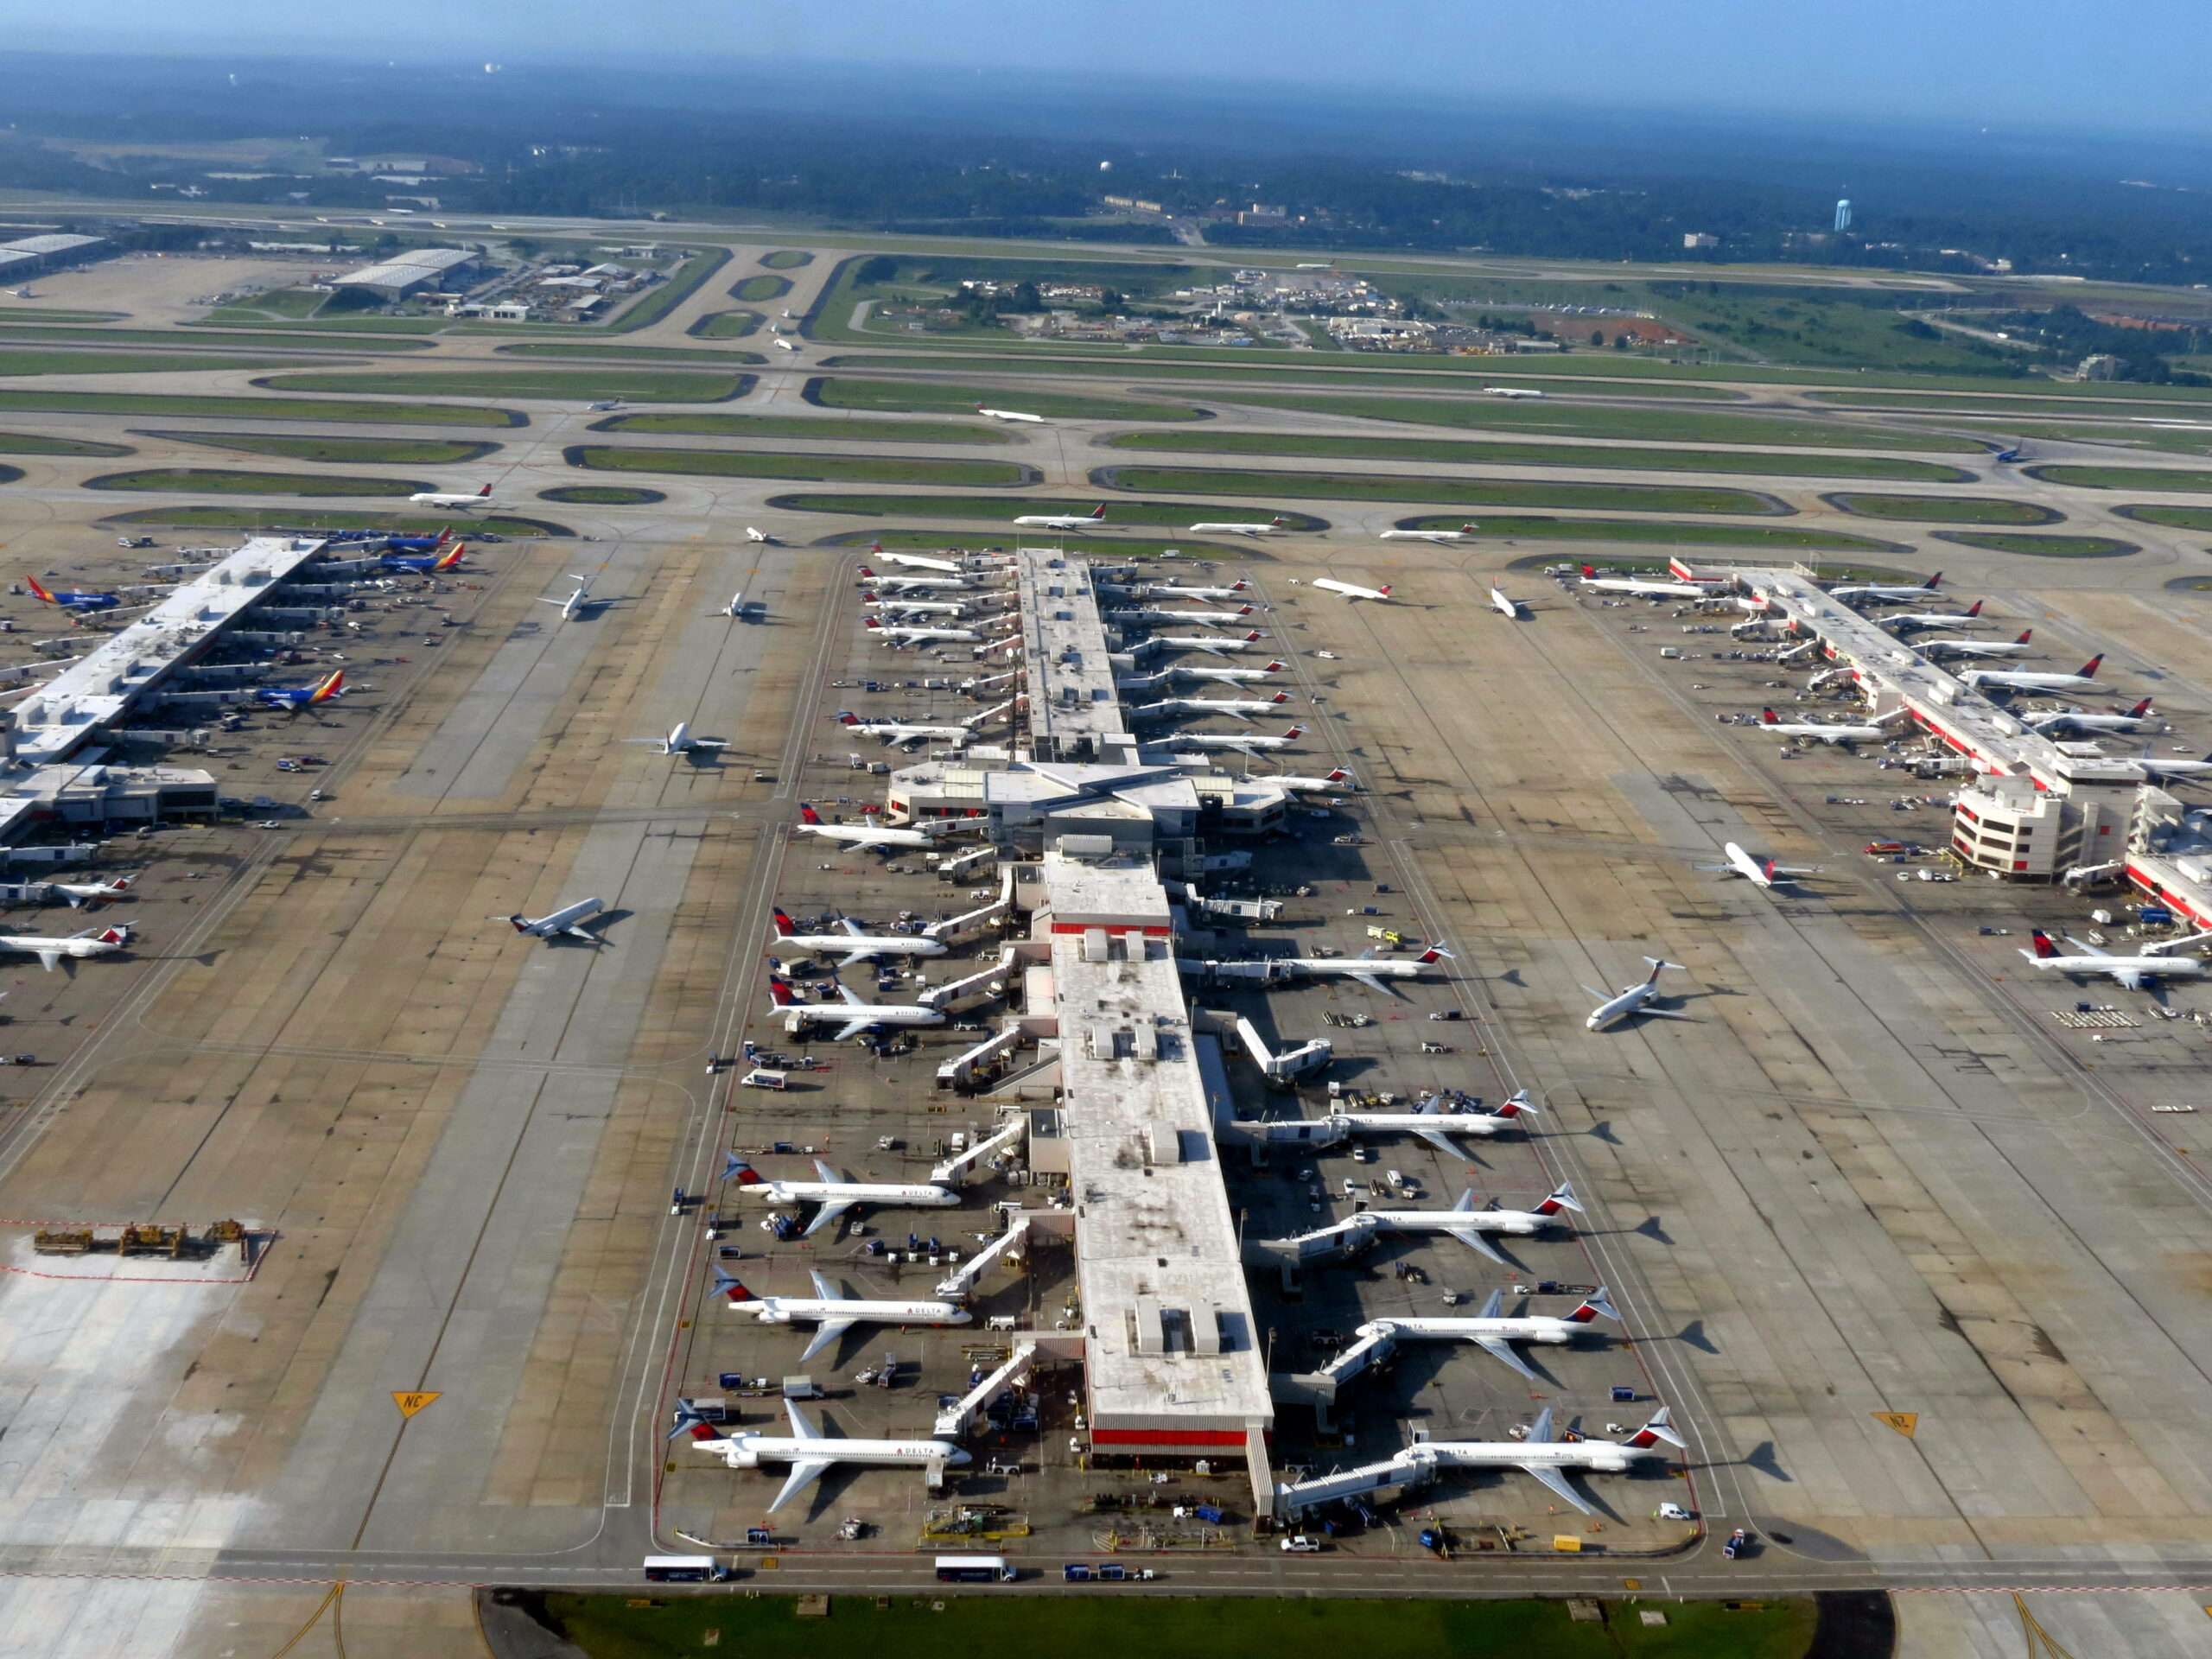 What Are The Top 5 Busiest Airports In The World?